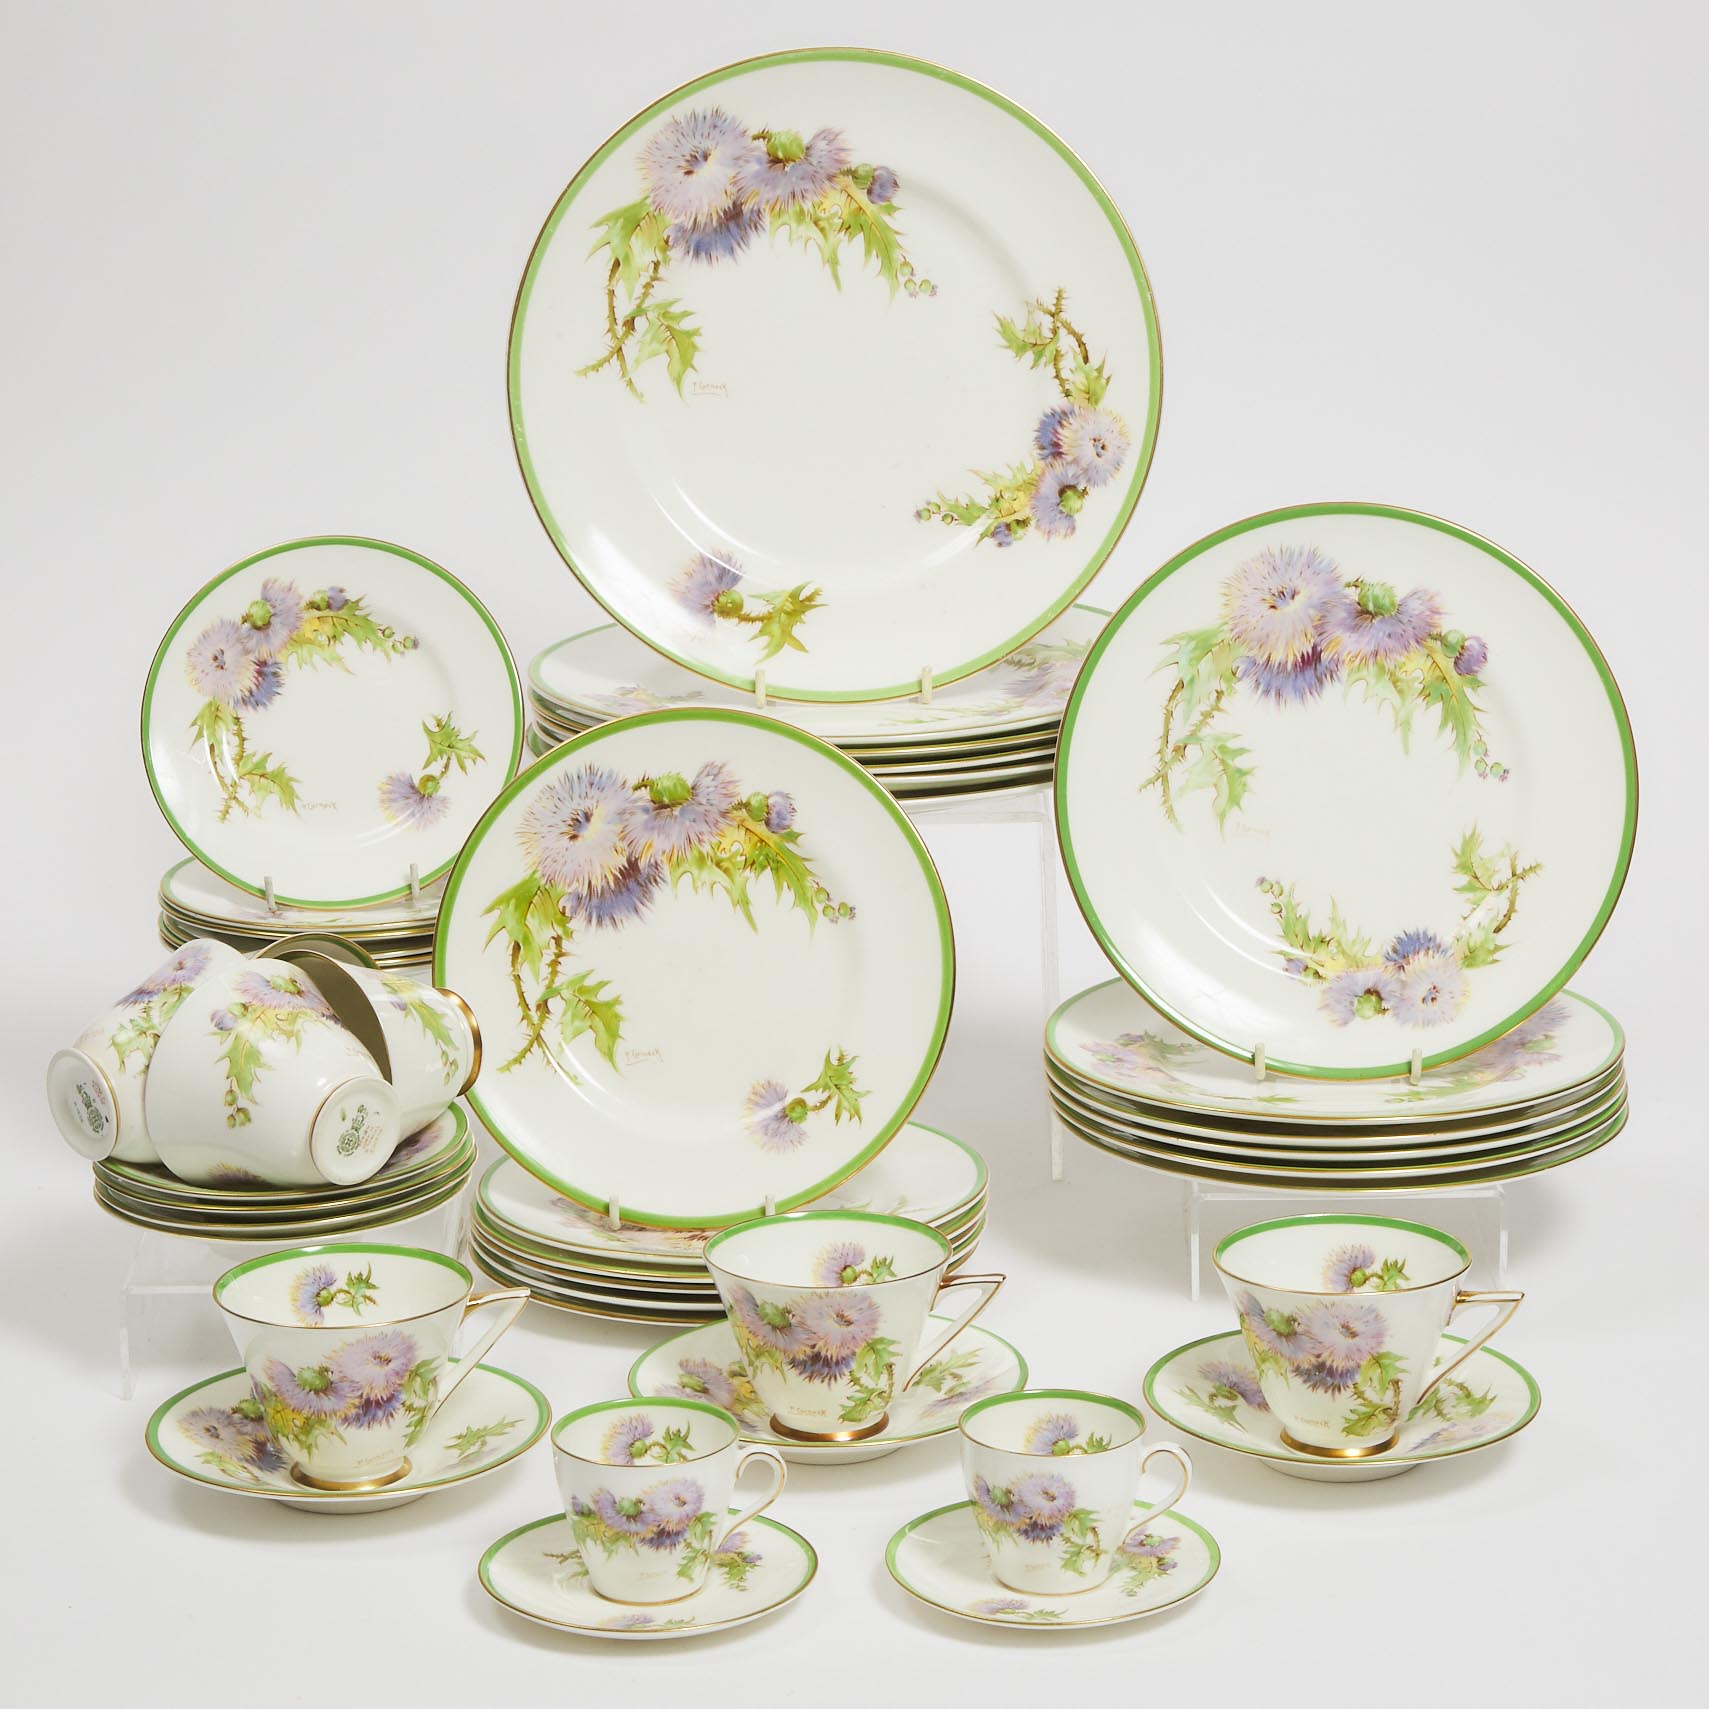 Royal Doulton 'Glamis Thistle' Pattern Service, Percy Curnock, 20th century